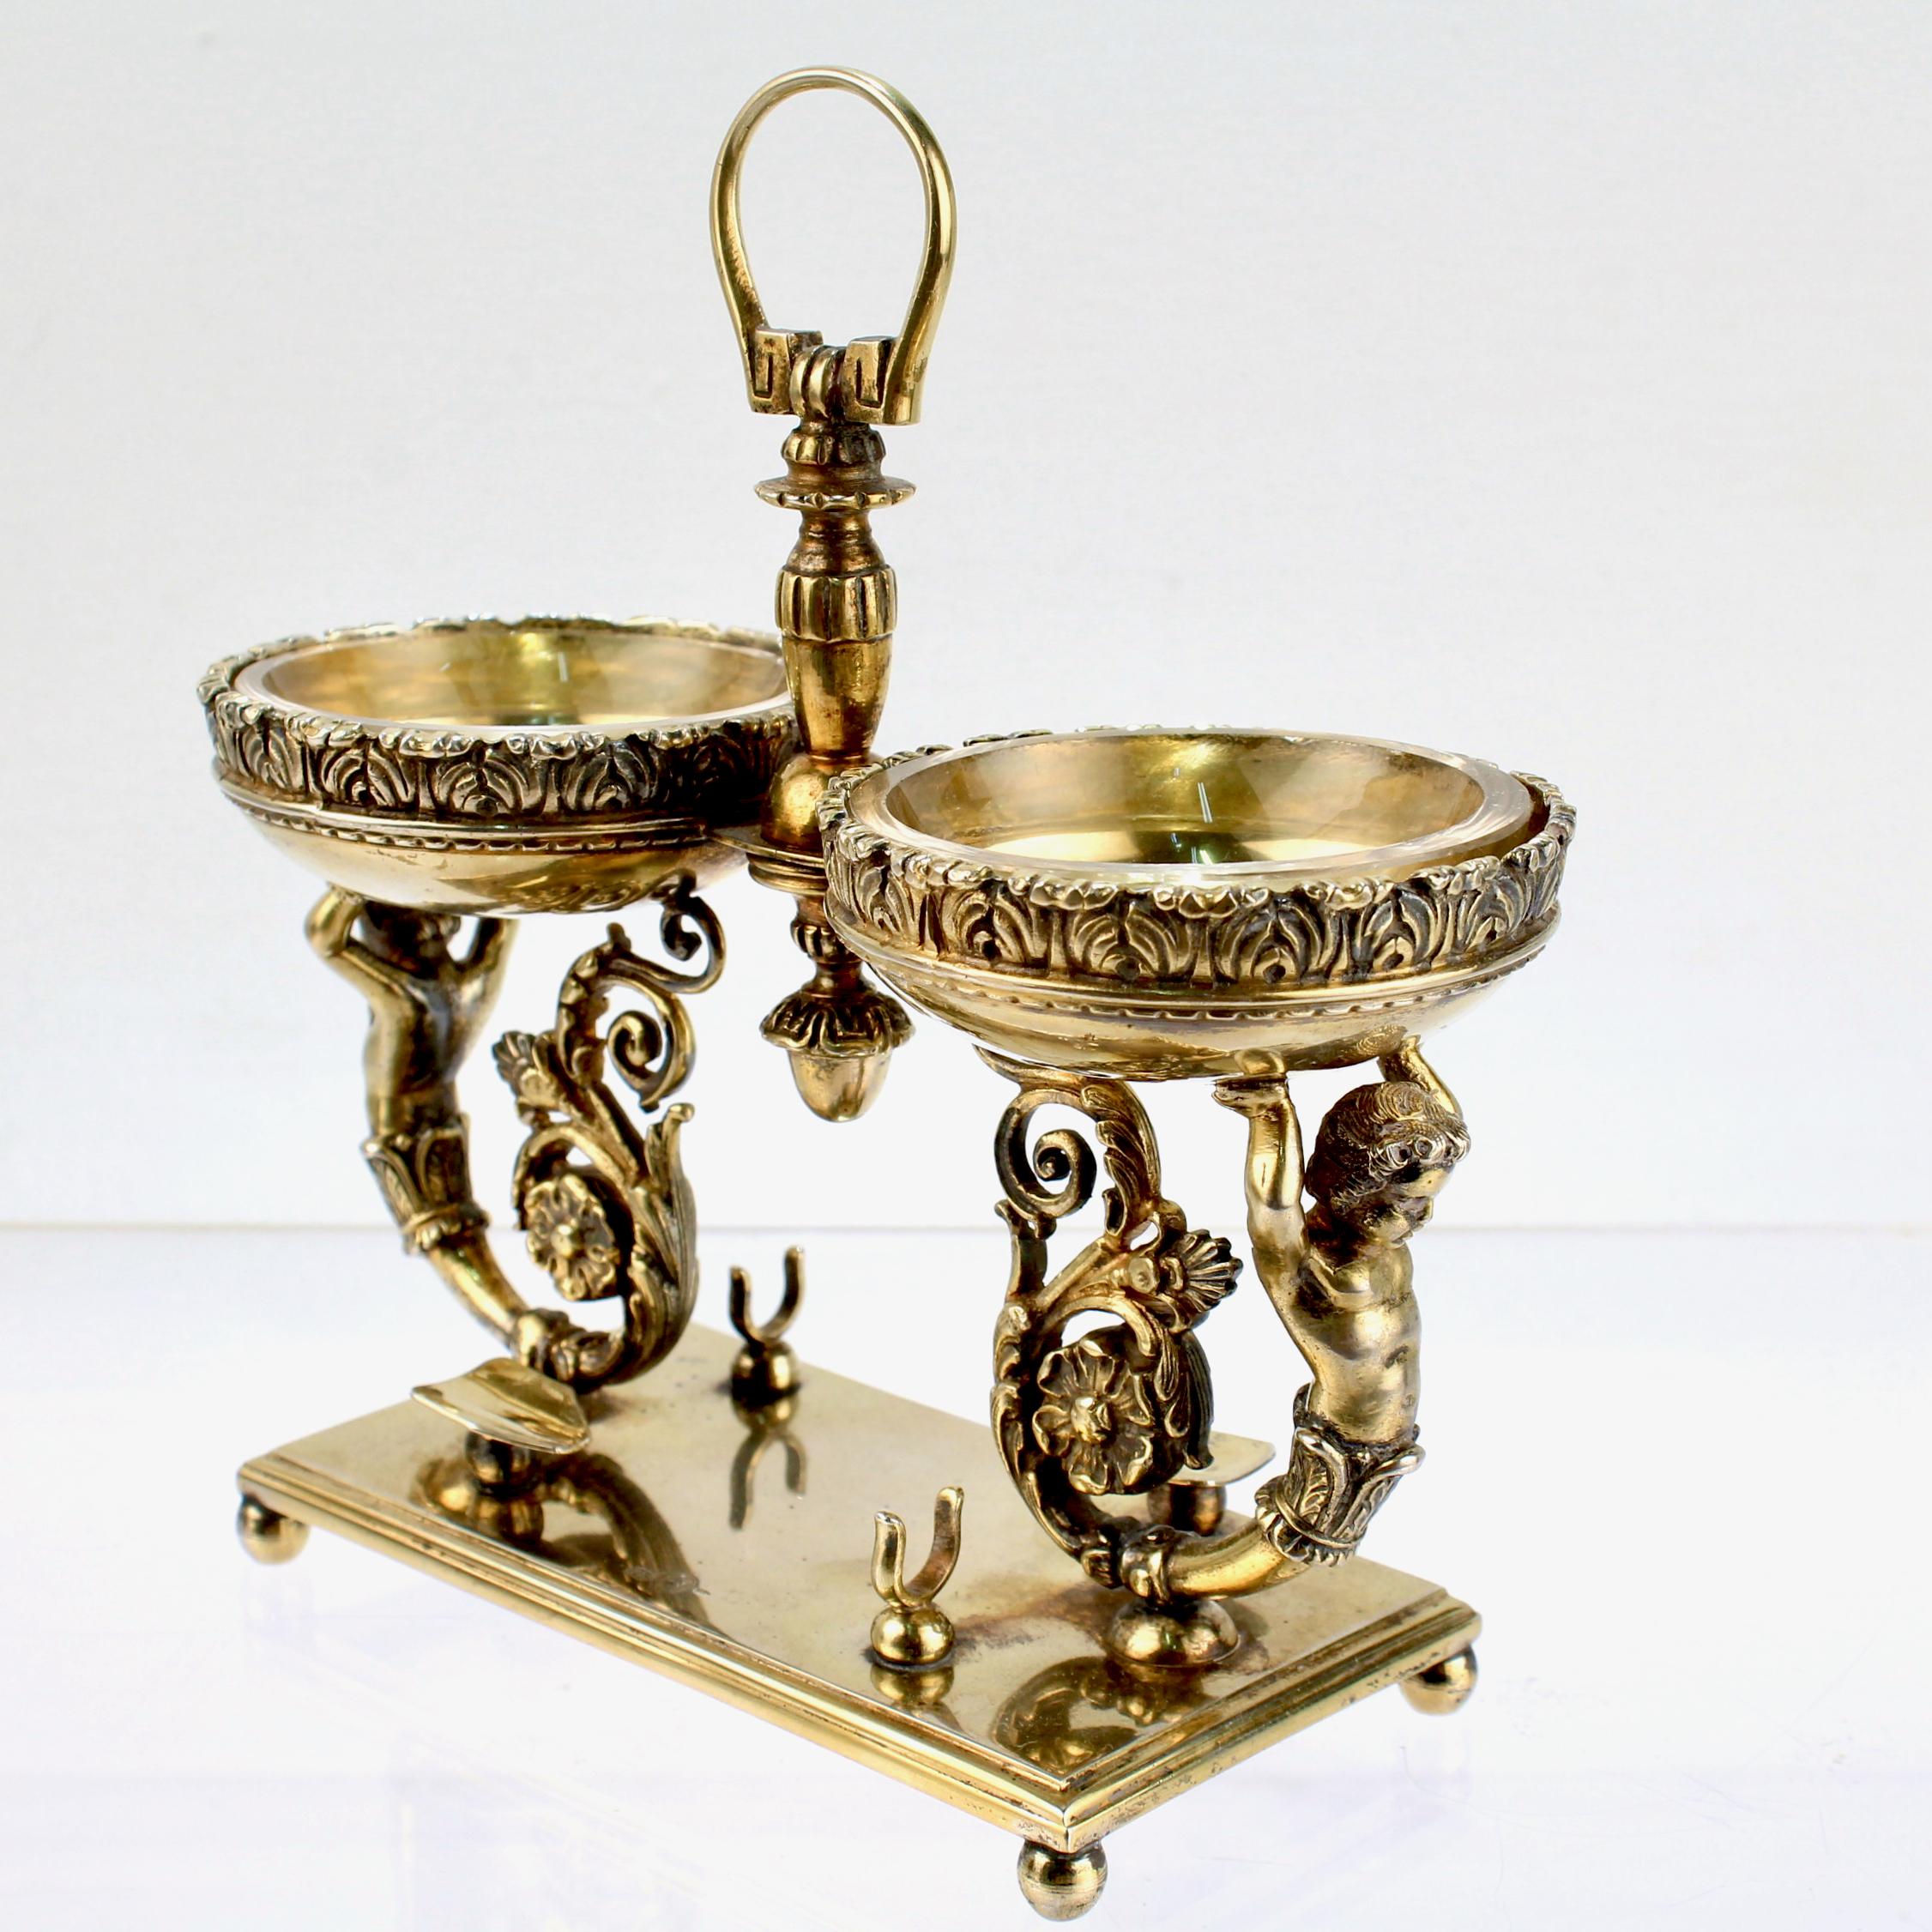 A fine Italian double caviar stand or holder.

In 800 silver with a gold wash.

Having figural half-cherub supports on a flat plinth with two spoon rests and ornate chased decoration throughout.

Together with its 2 original glass liners.

Simply a